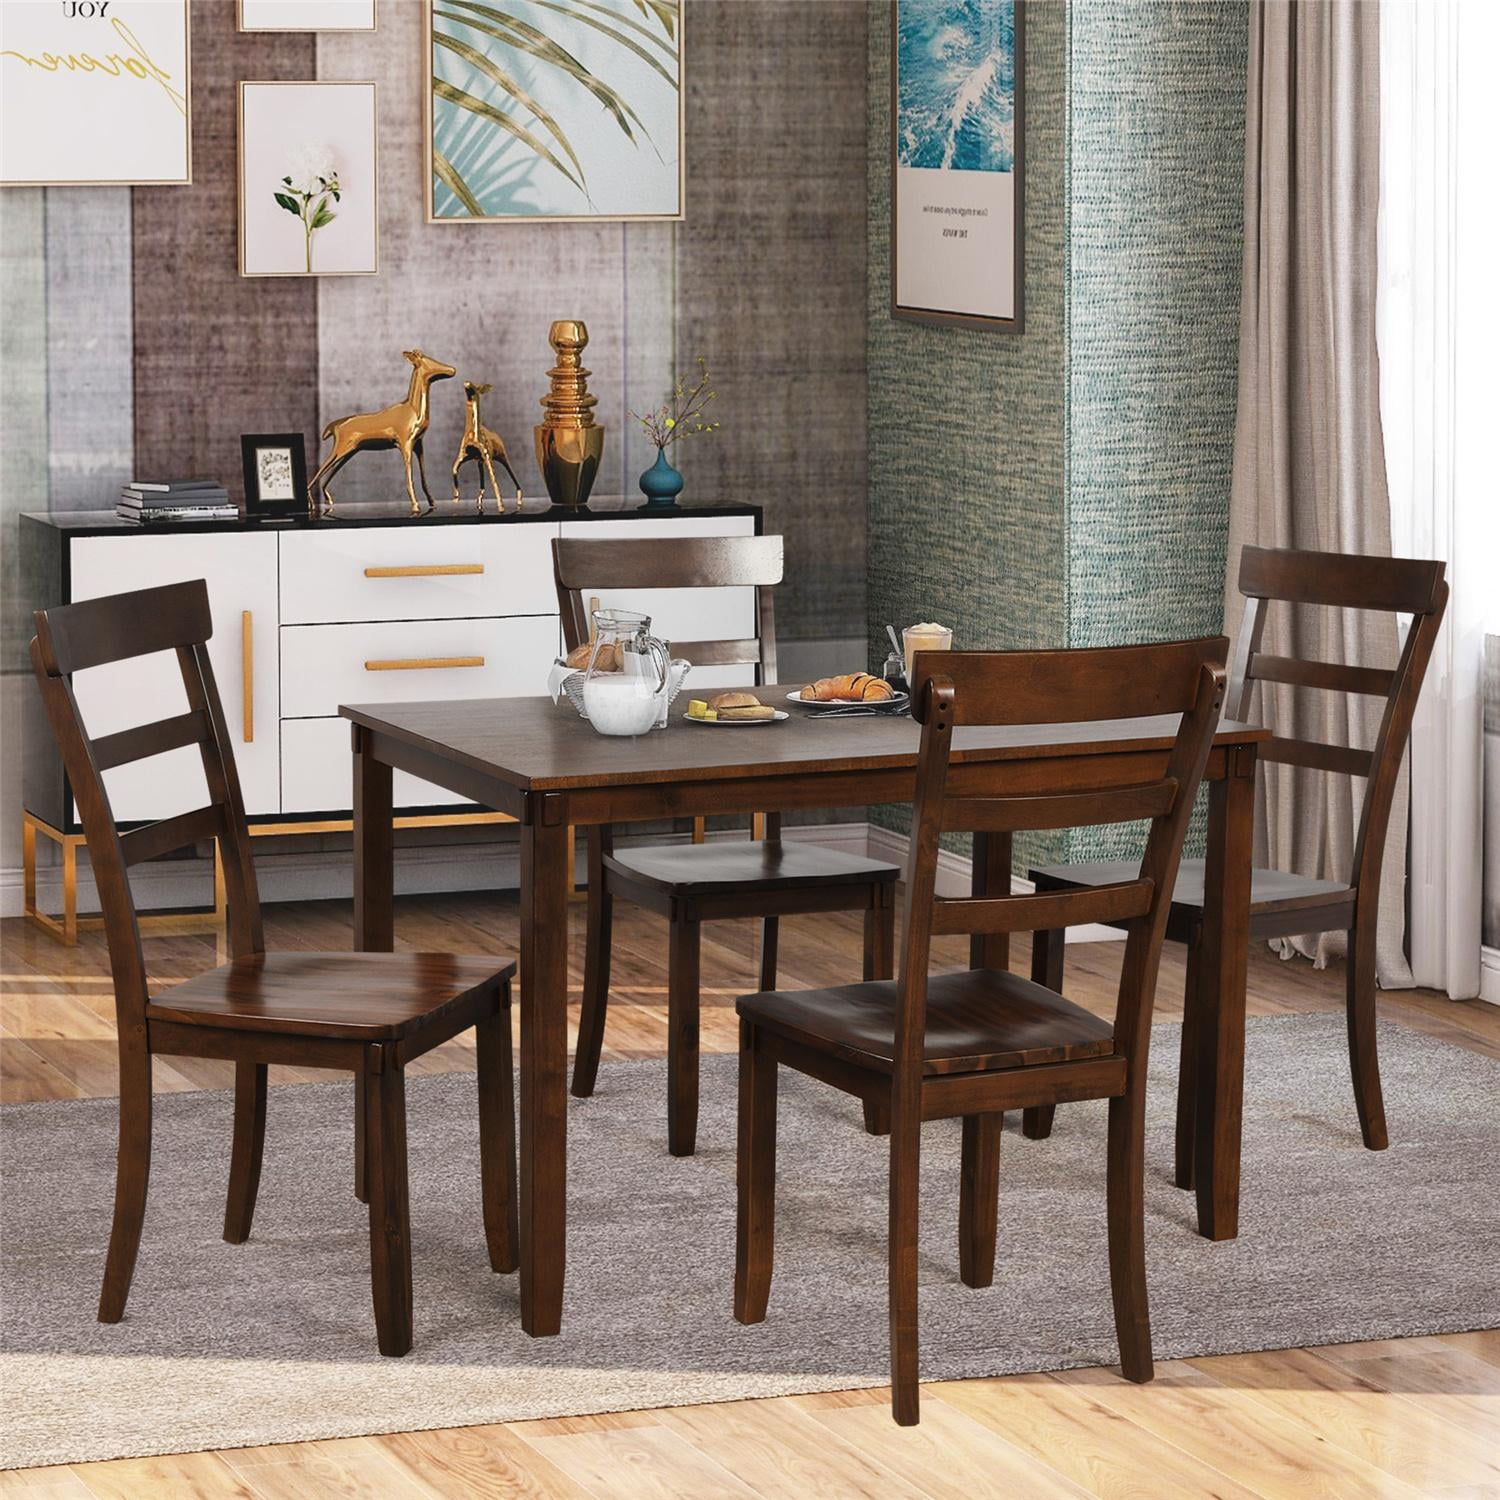 Details about   Dining Table and Chairs 4 2 Seater Solid Wood Kitchen Furniture Dining Room Set 